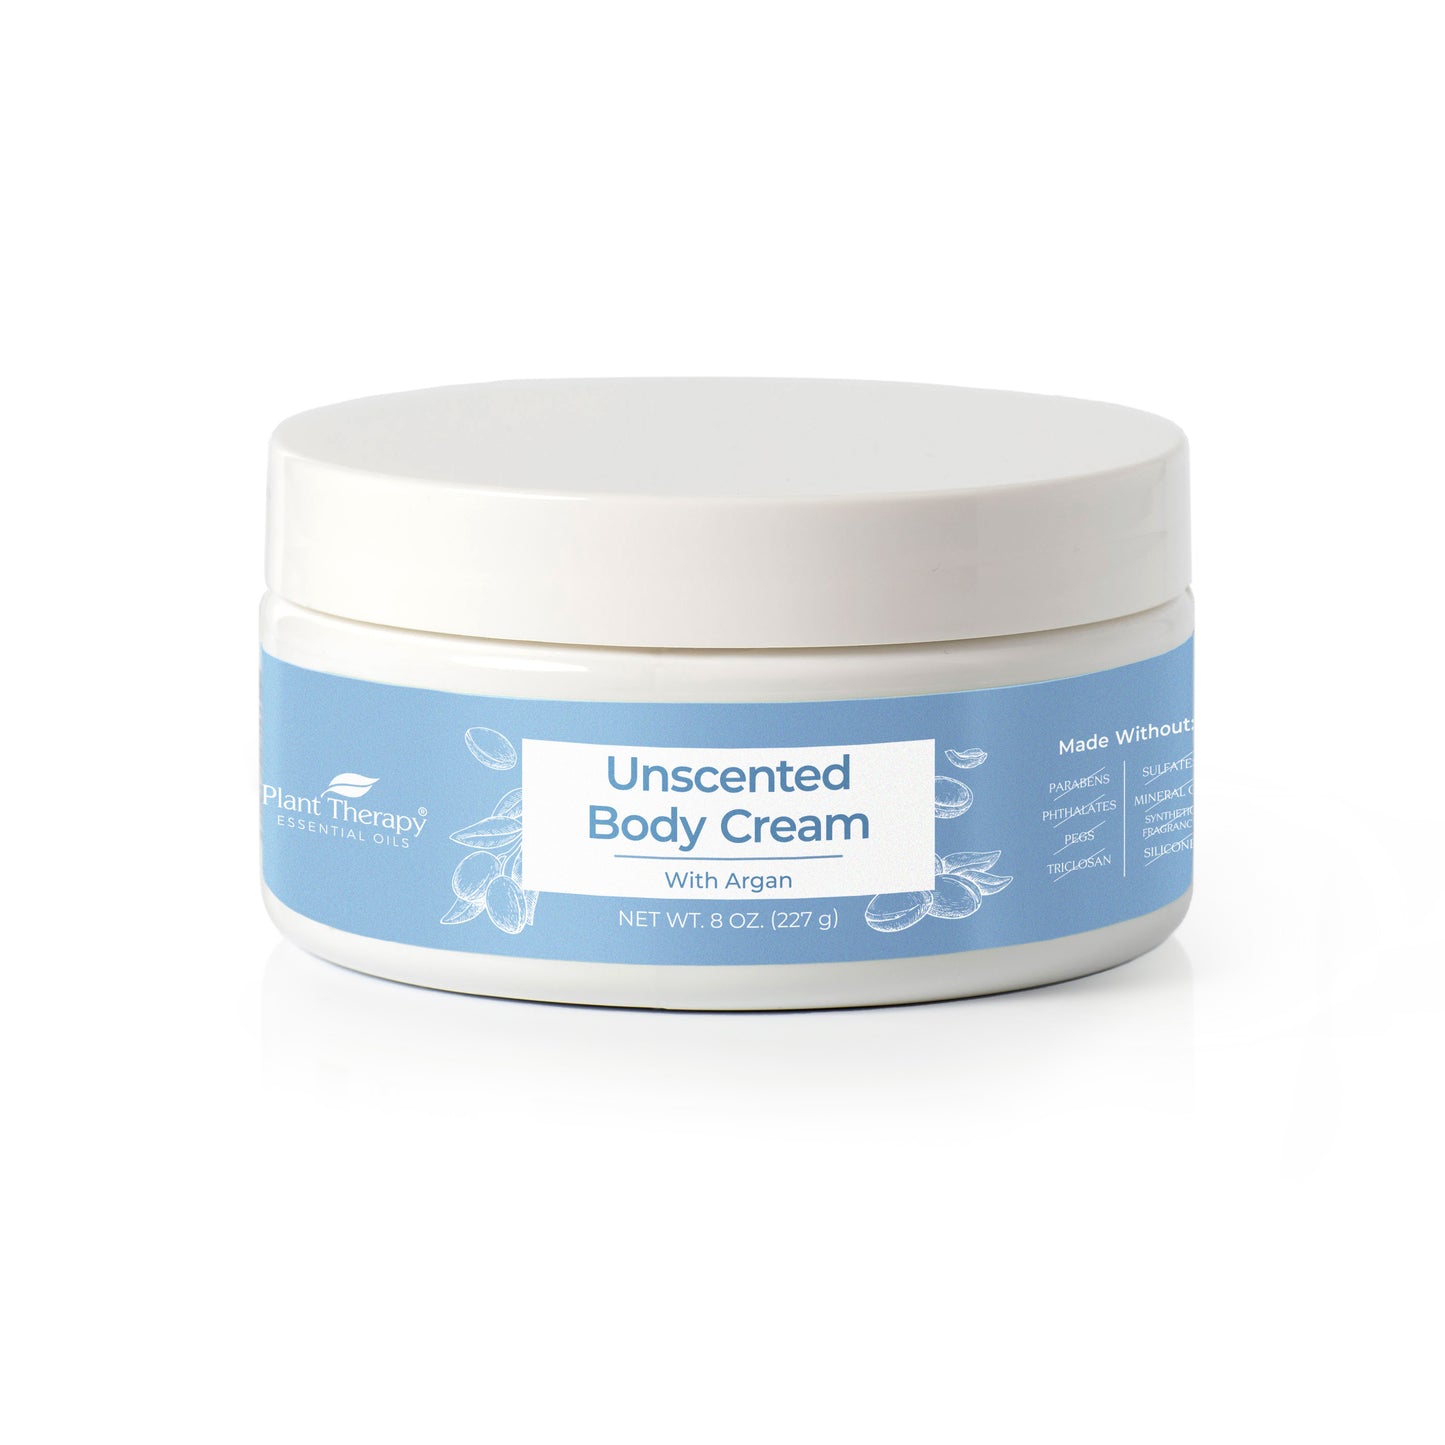 Unscented Body Cream with Argan